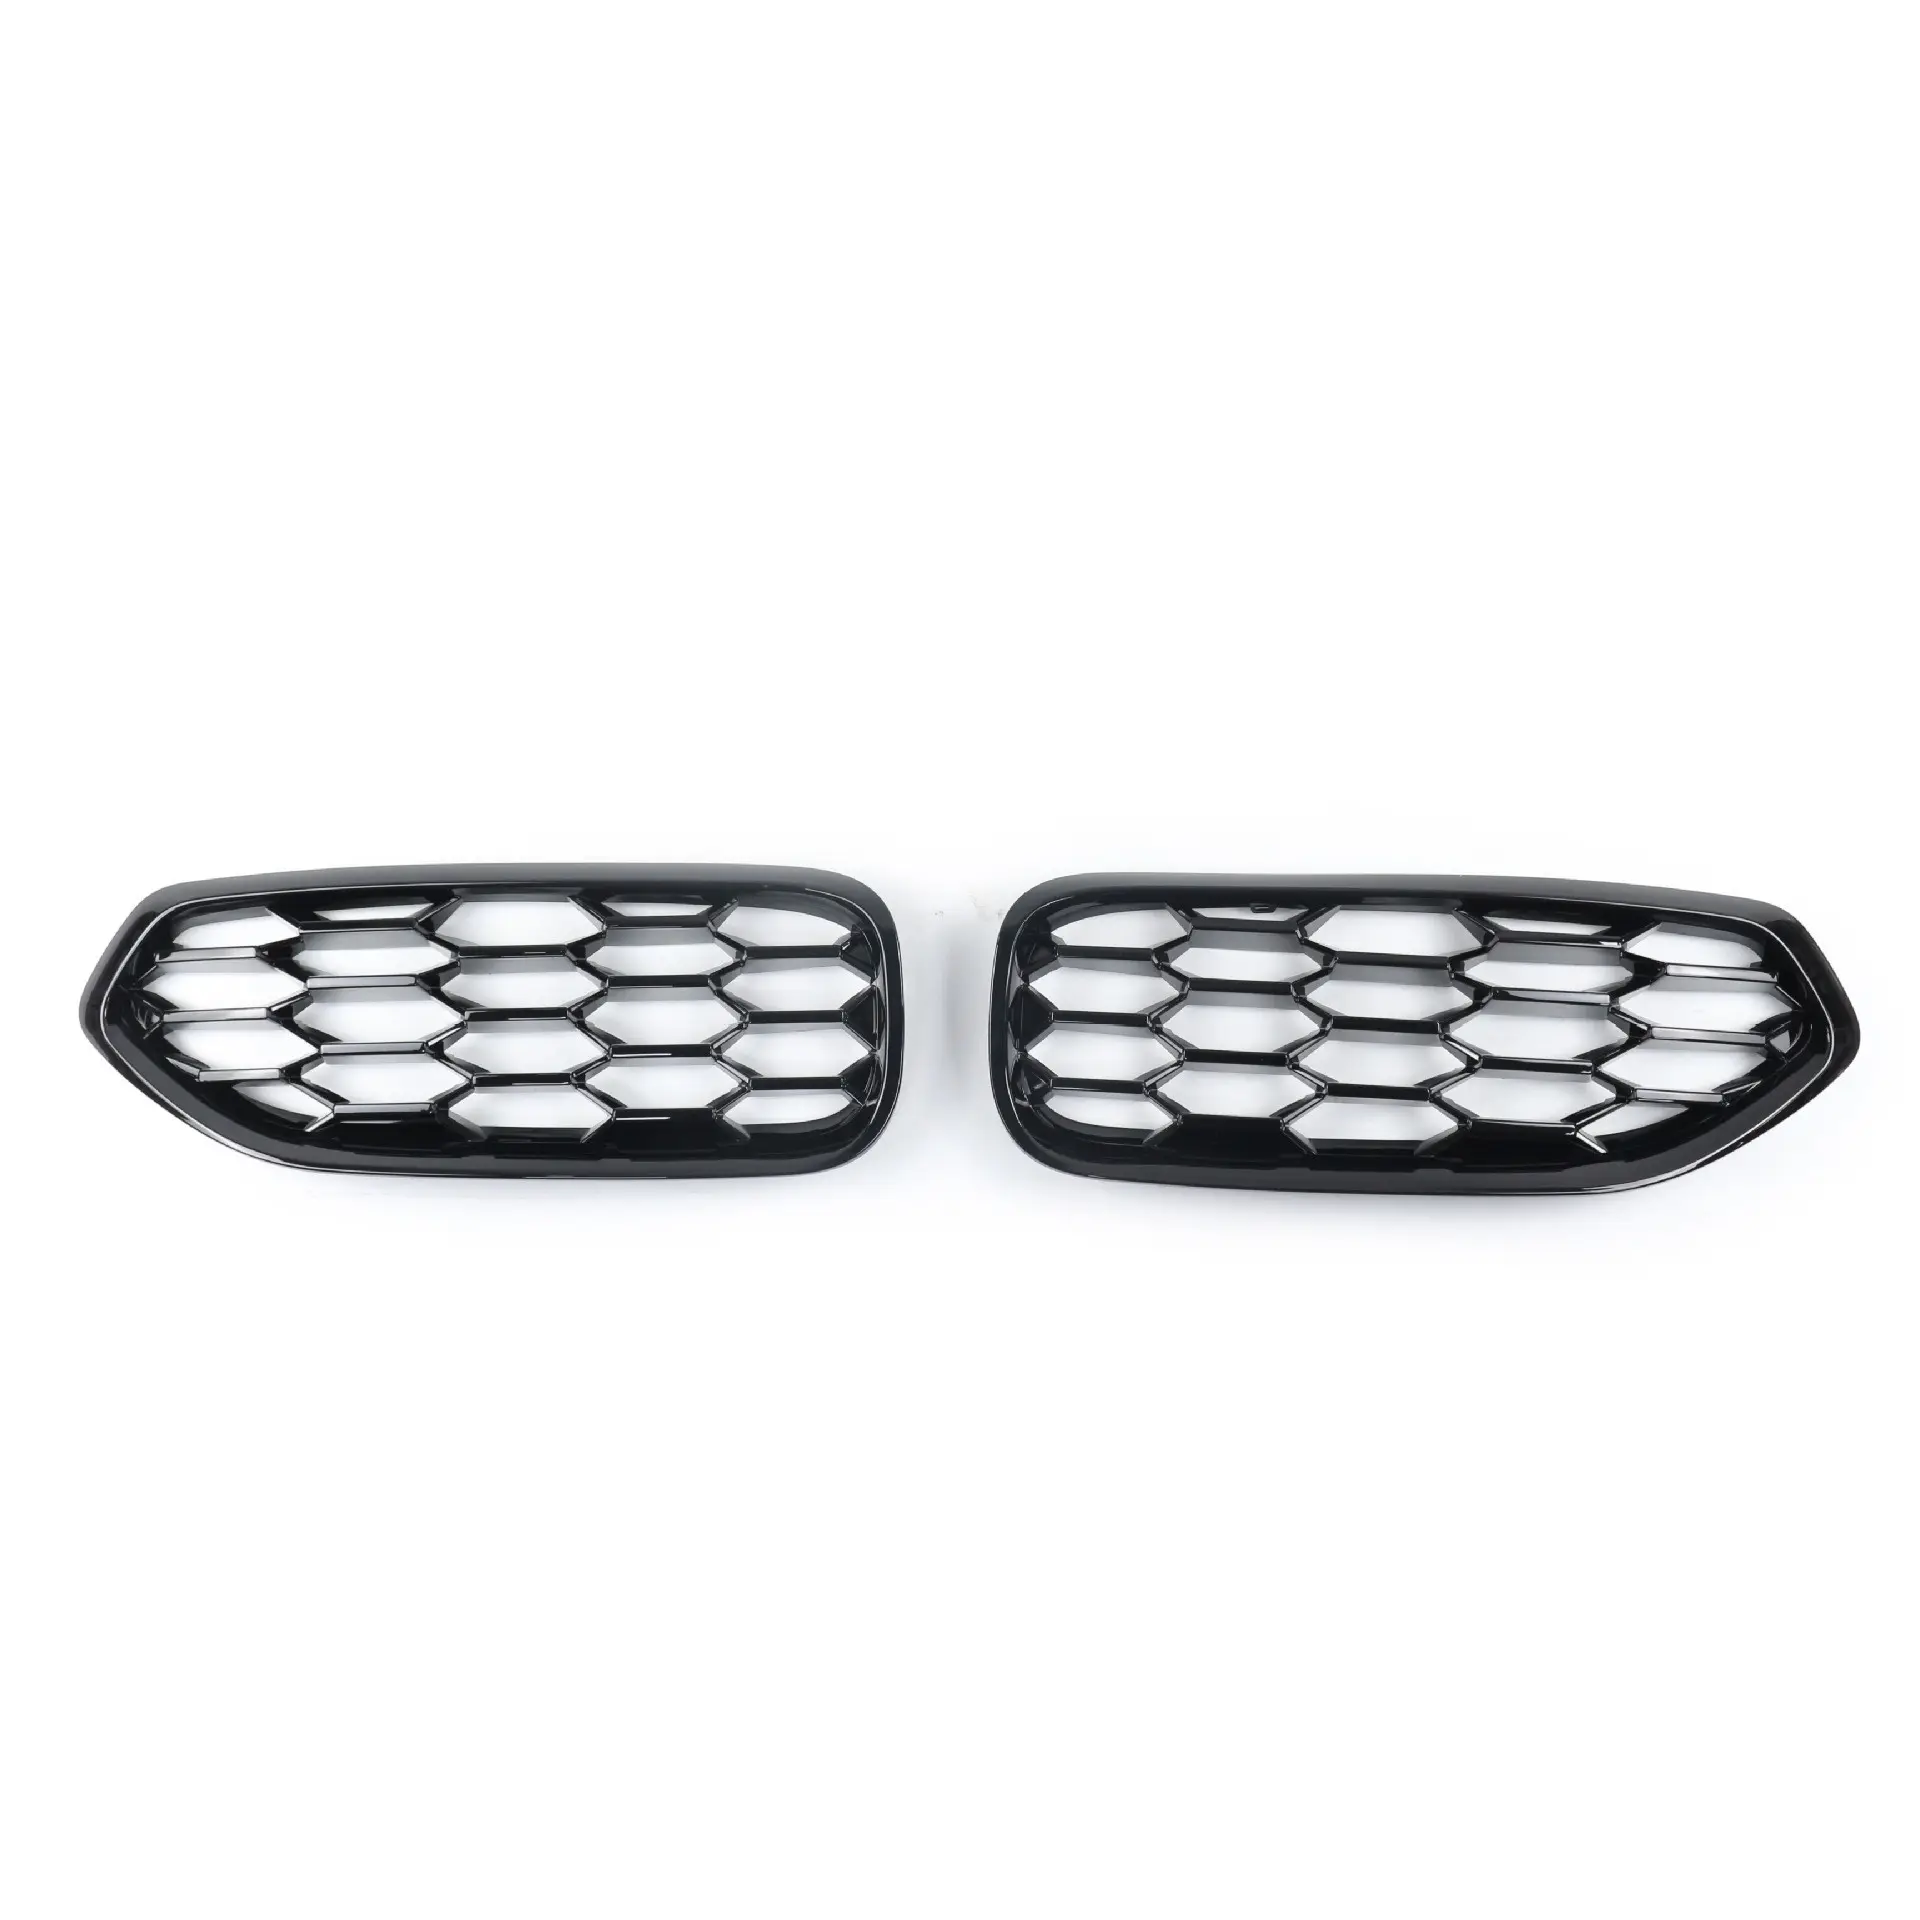 Front grille for BMW Z4 New G29 Black medium net starry Diamond water tank cover